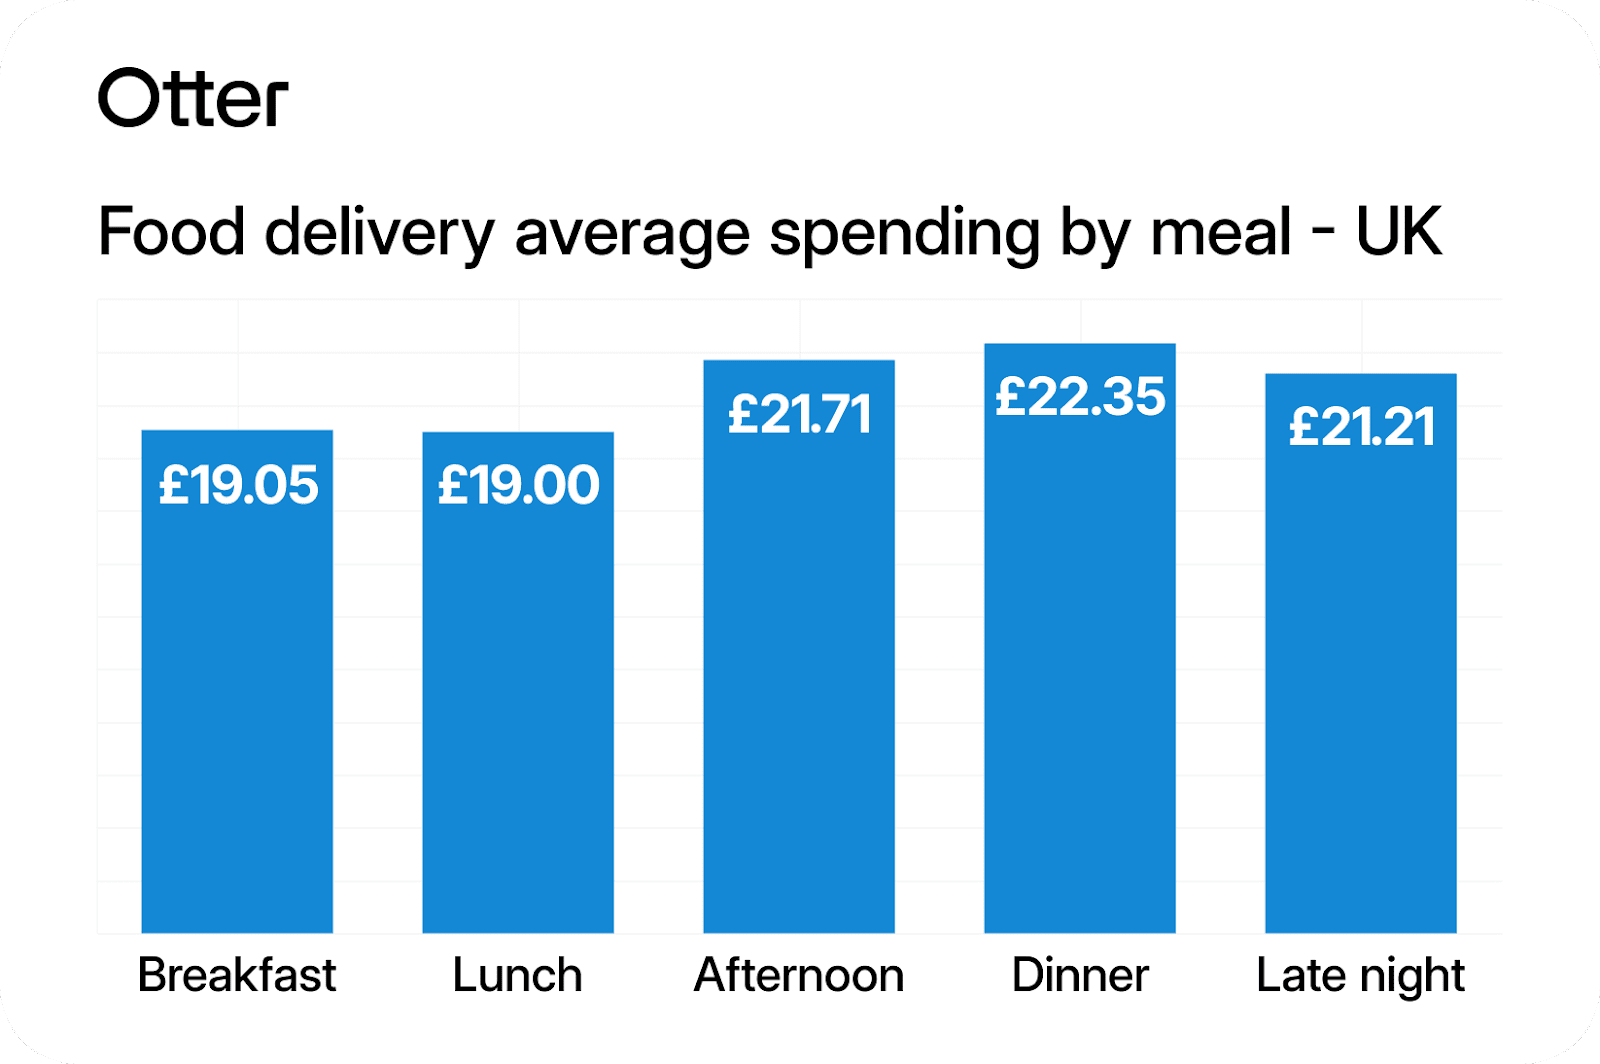 Food delivery average spending by meal in the UK